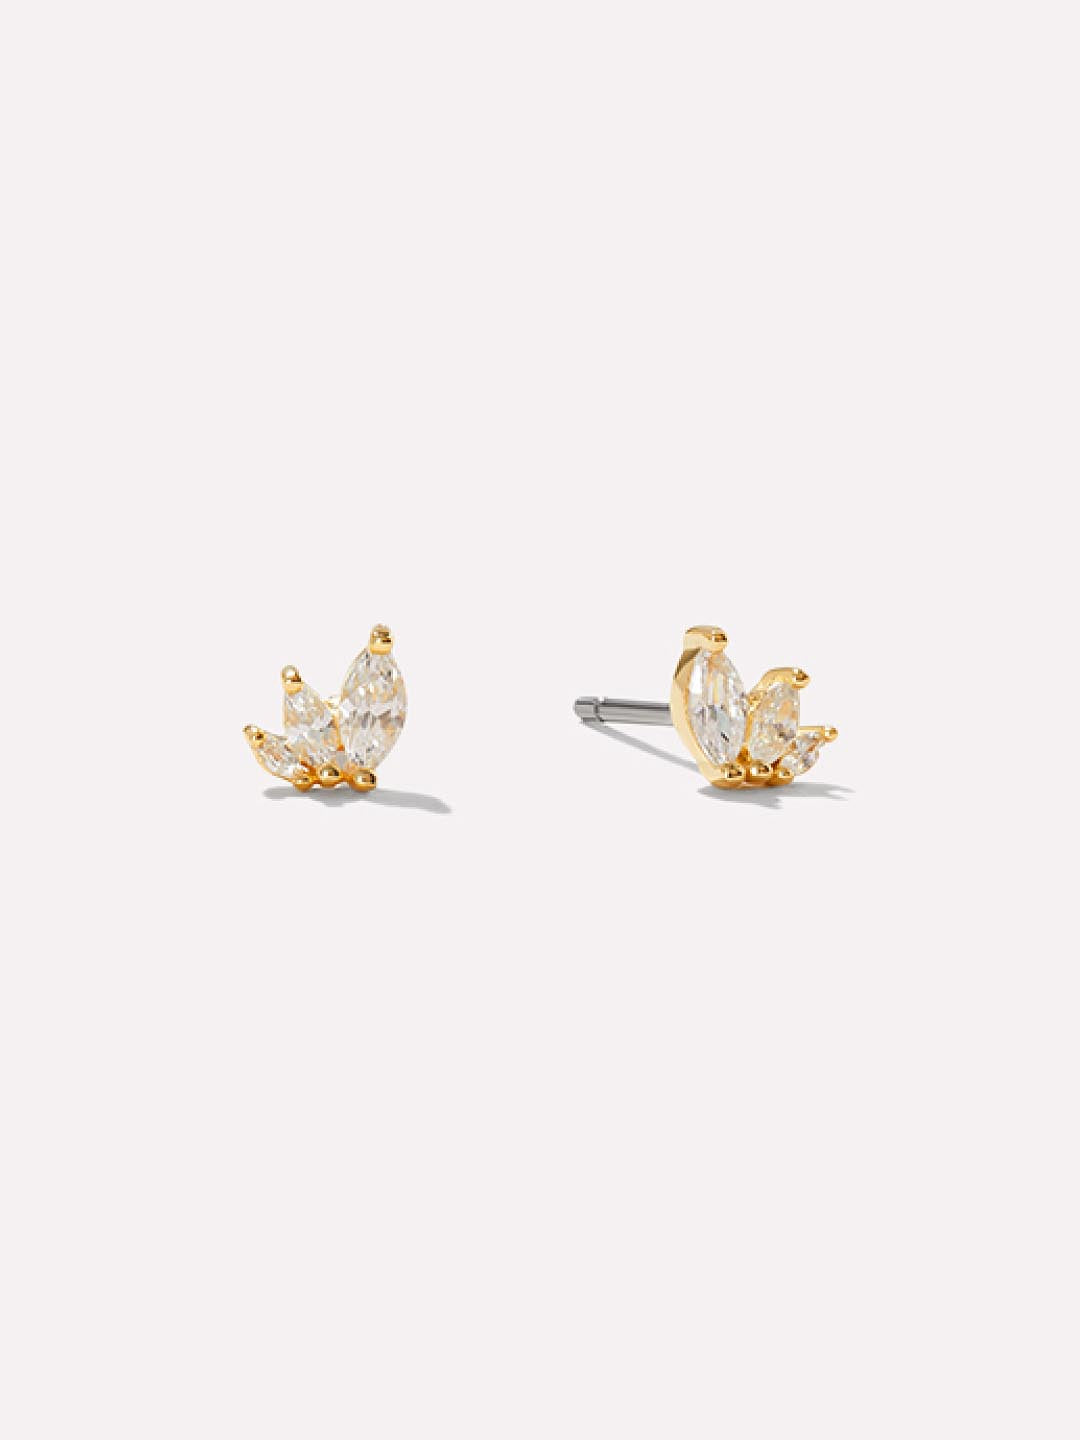 Gold Stud Earrings - Kennedy | Ana Luisa | Online Jewelry Store At ...